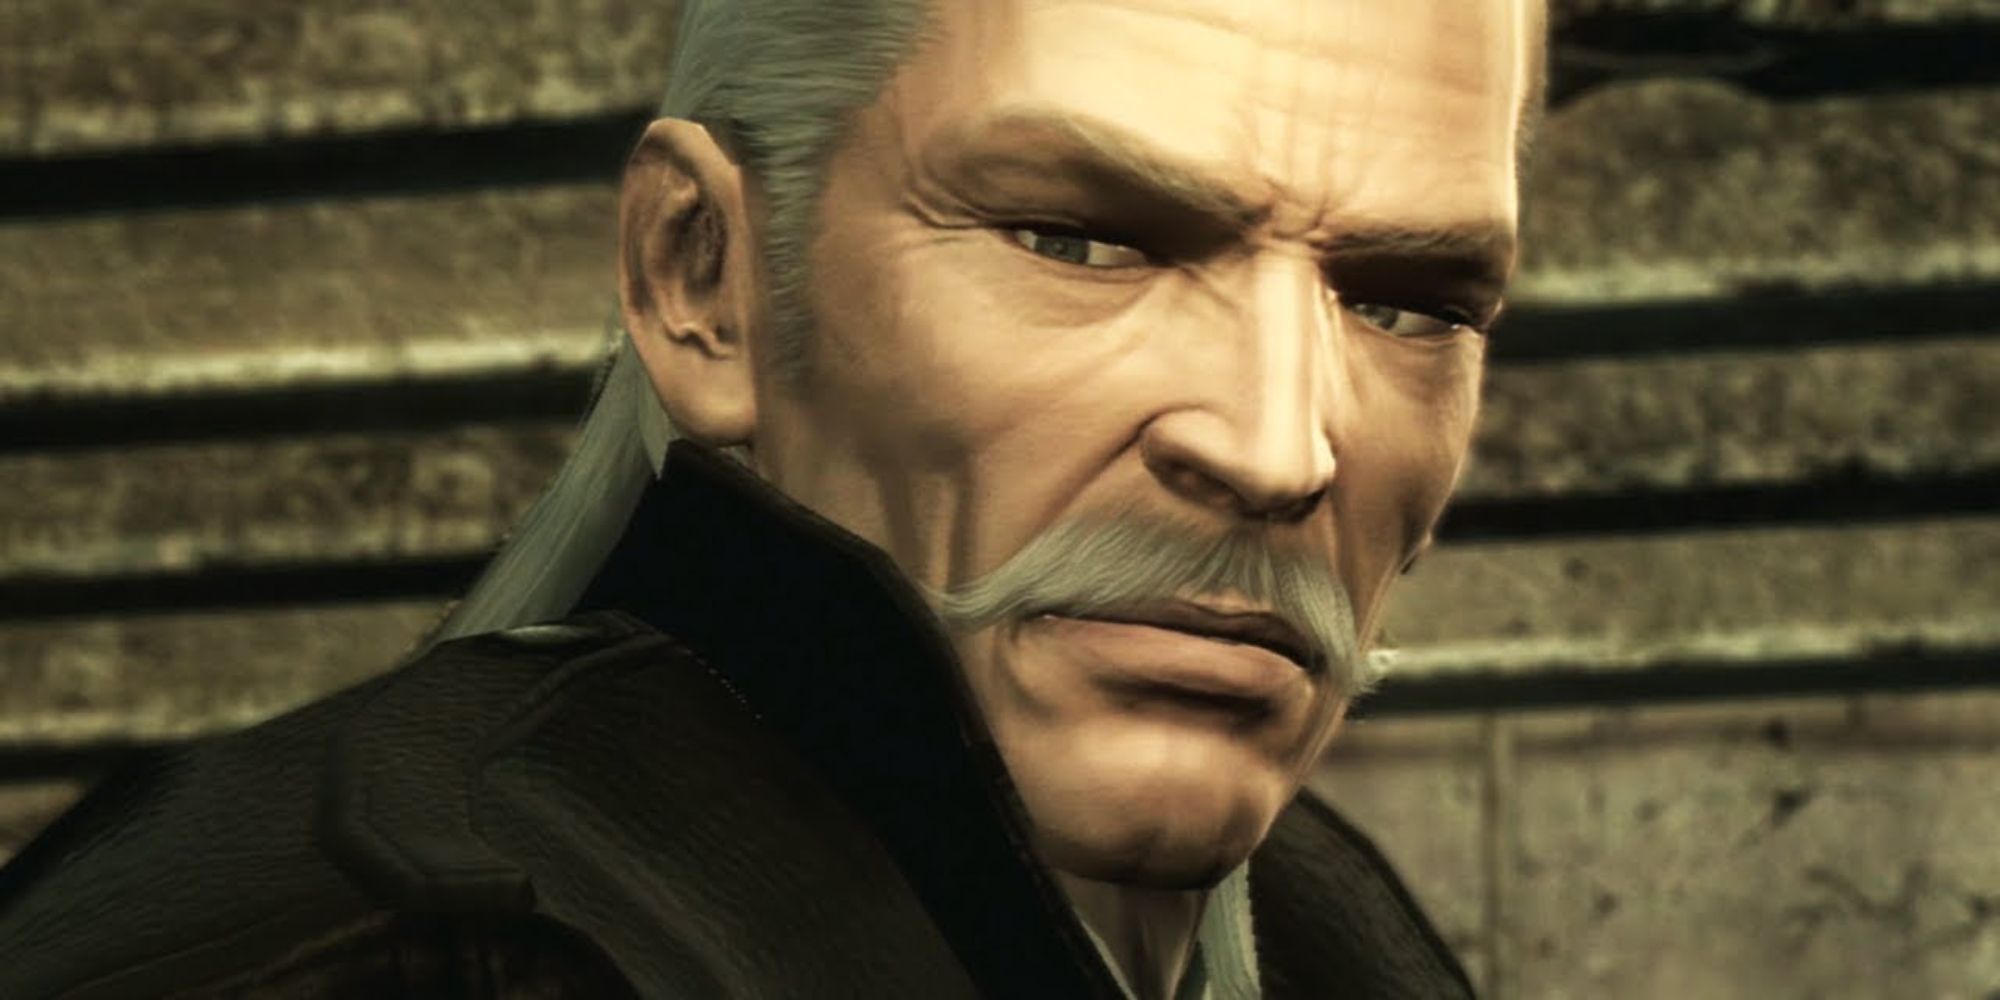 For the first time, Metal Gear Solid 4 will be available as a download